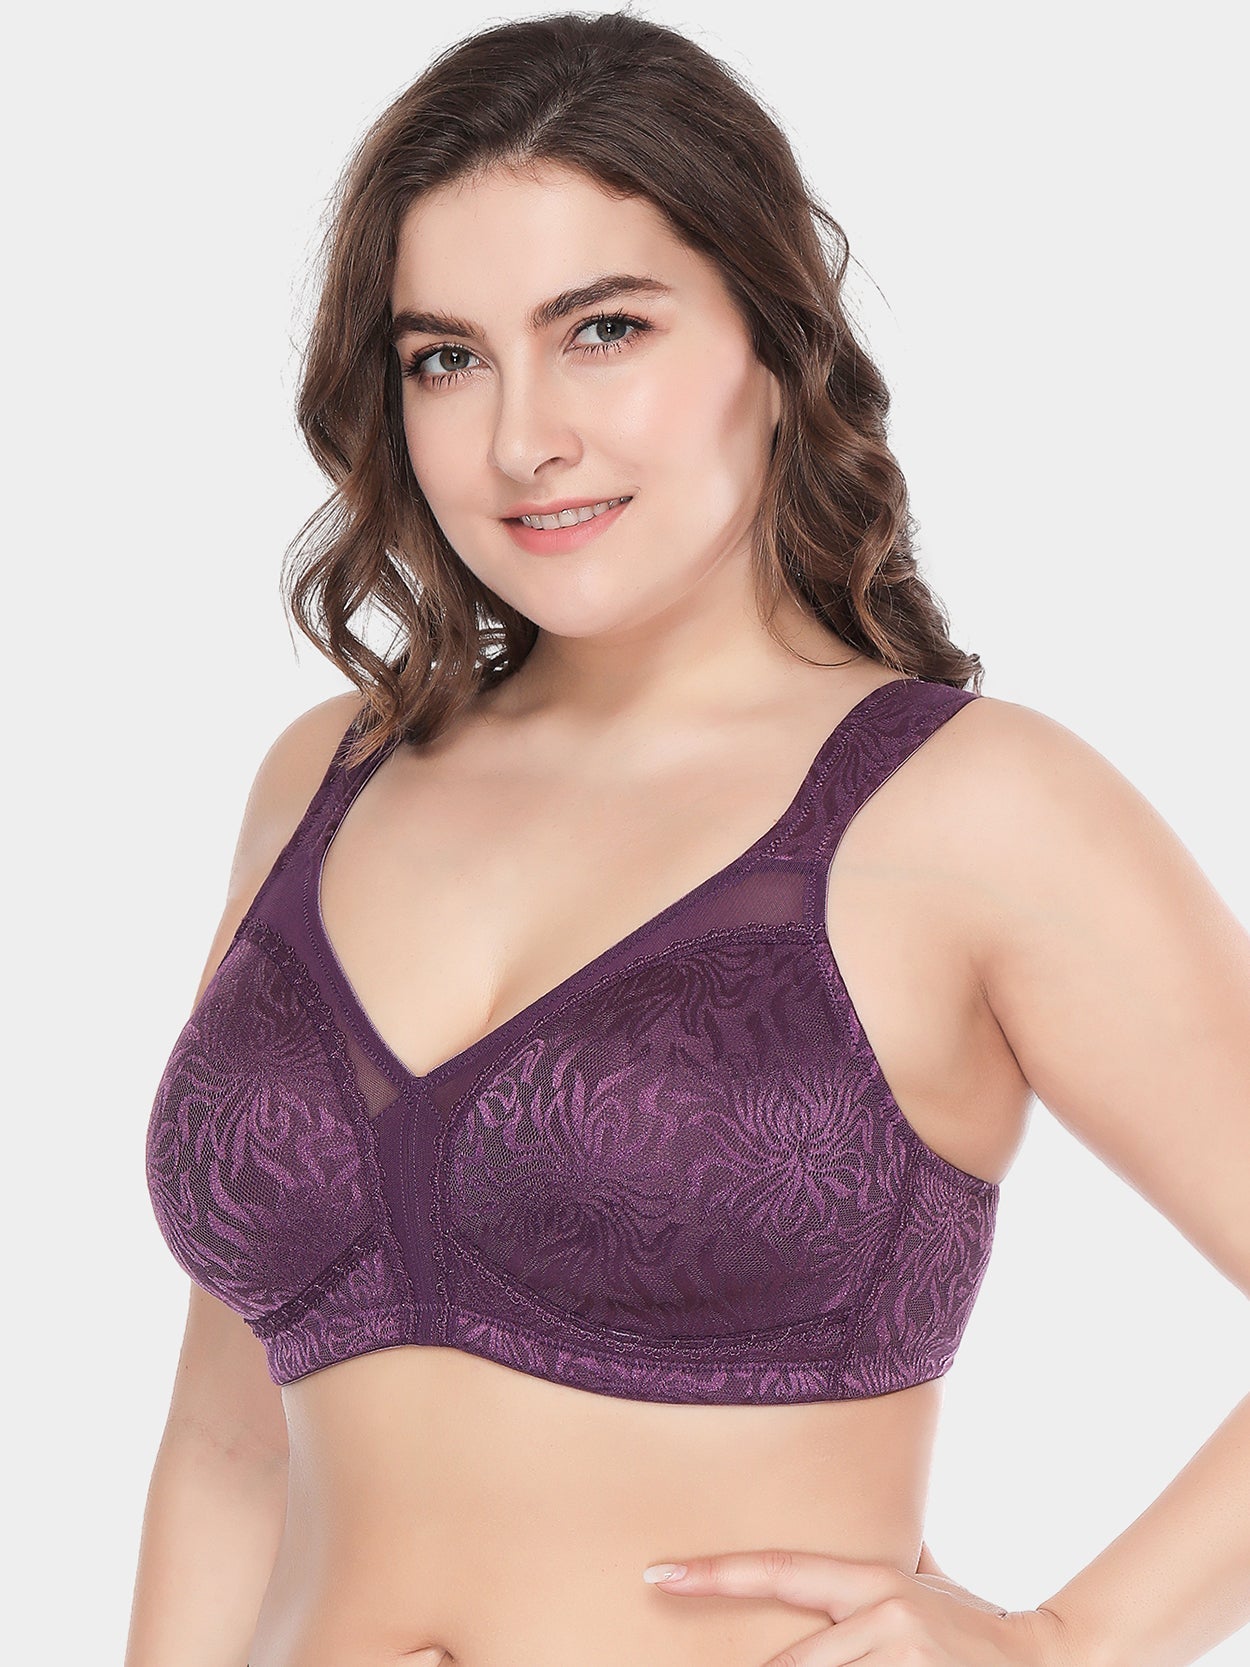 Size 46G Non Padded Bras, Plus Size Bras